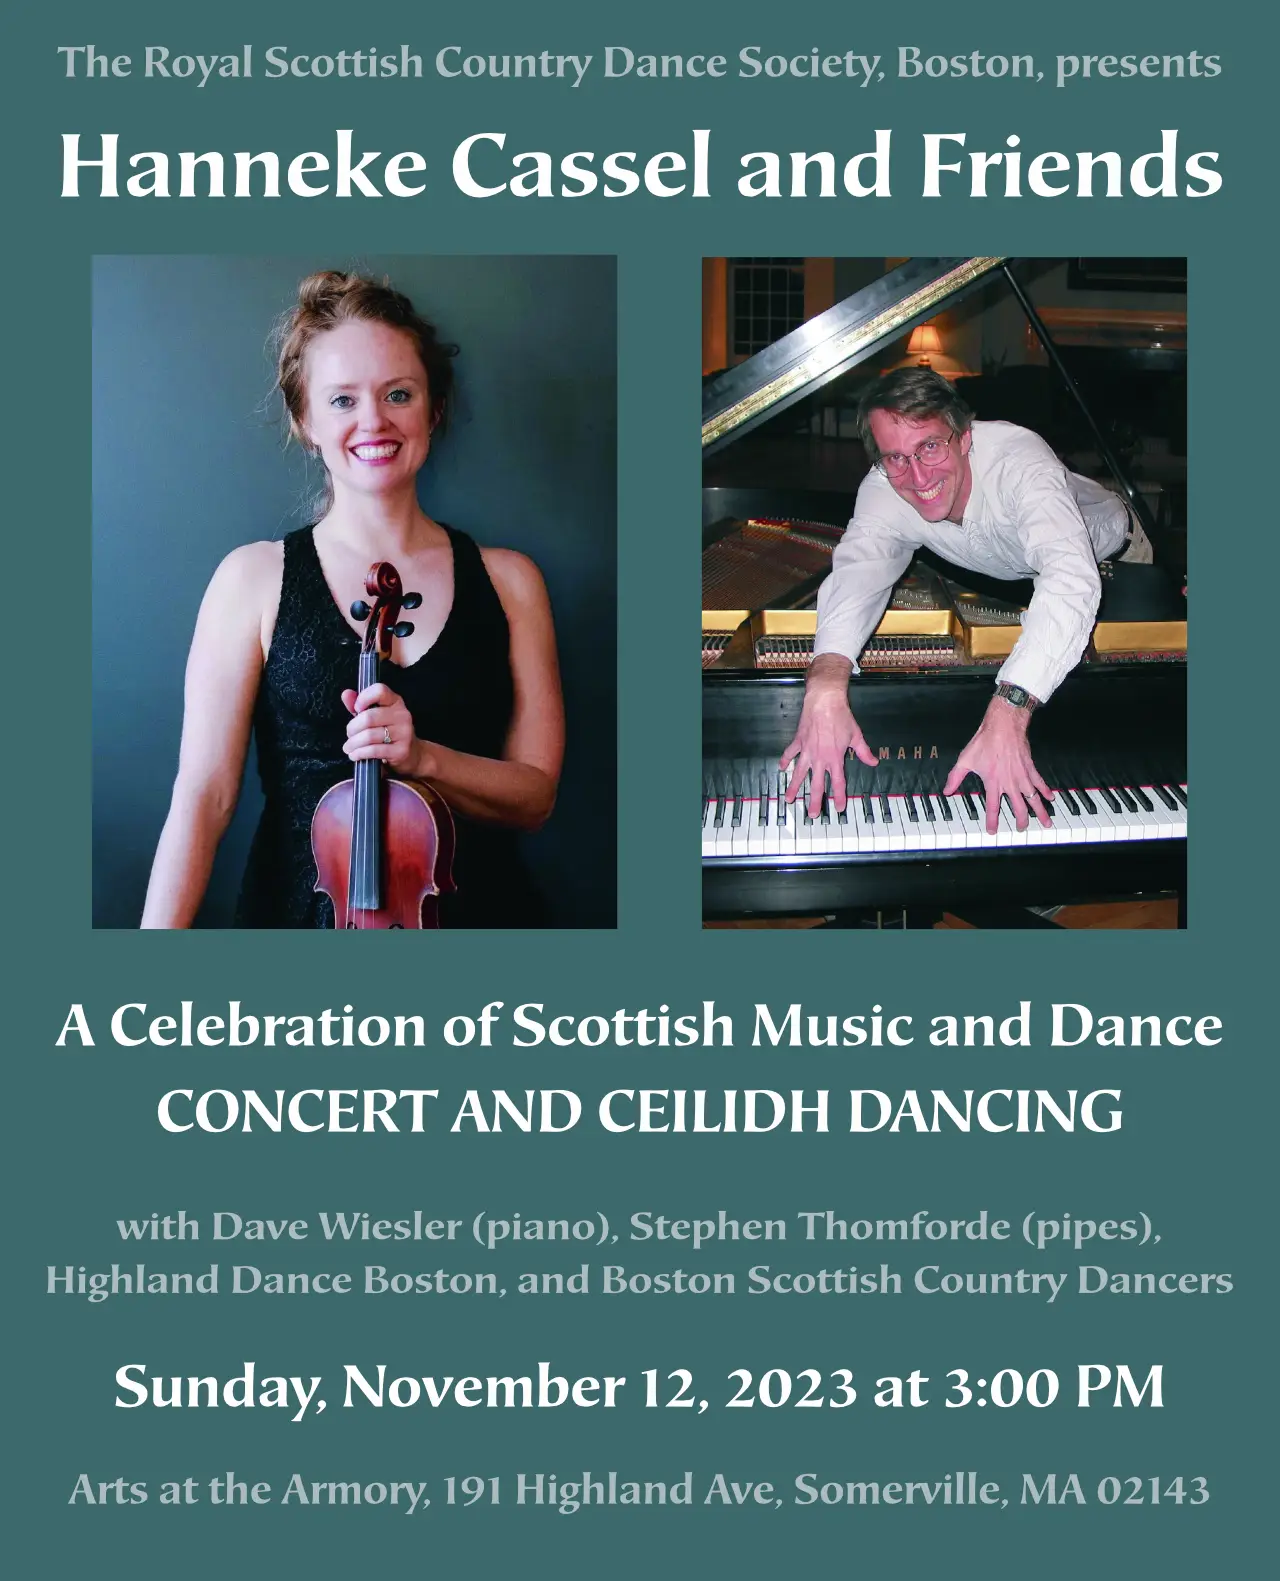 Concert and Ceilidh Dancing